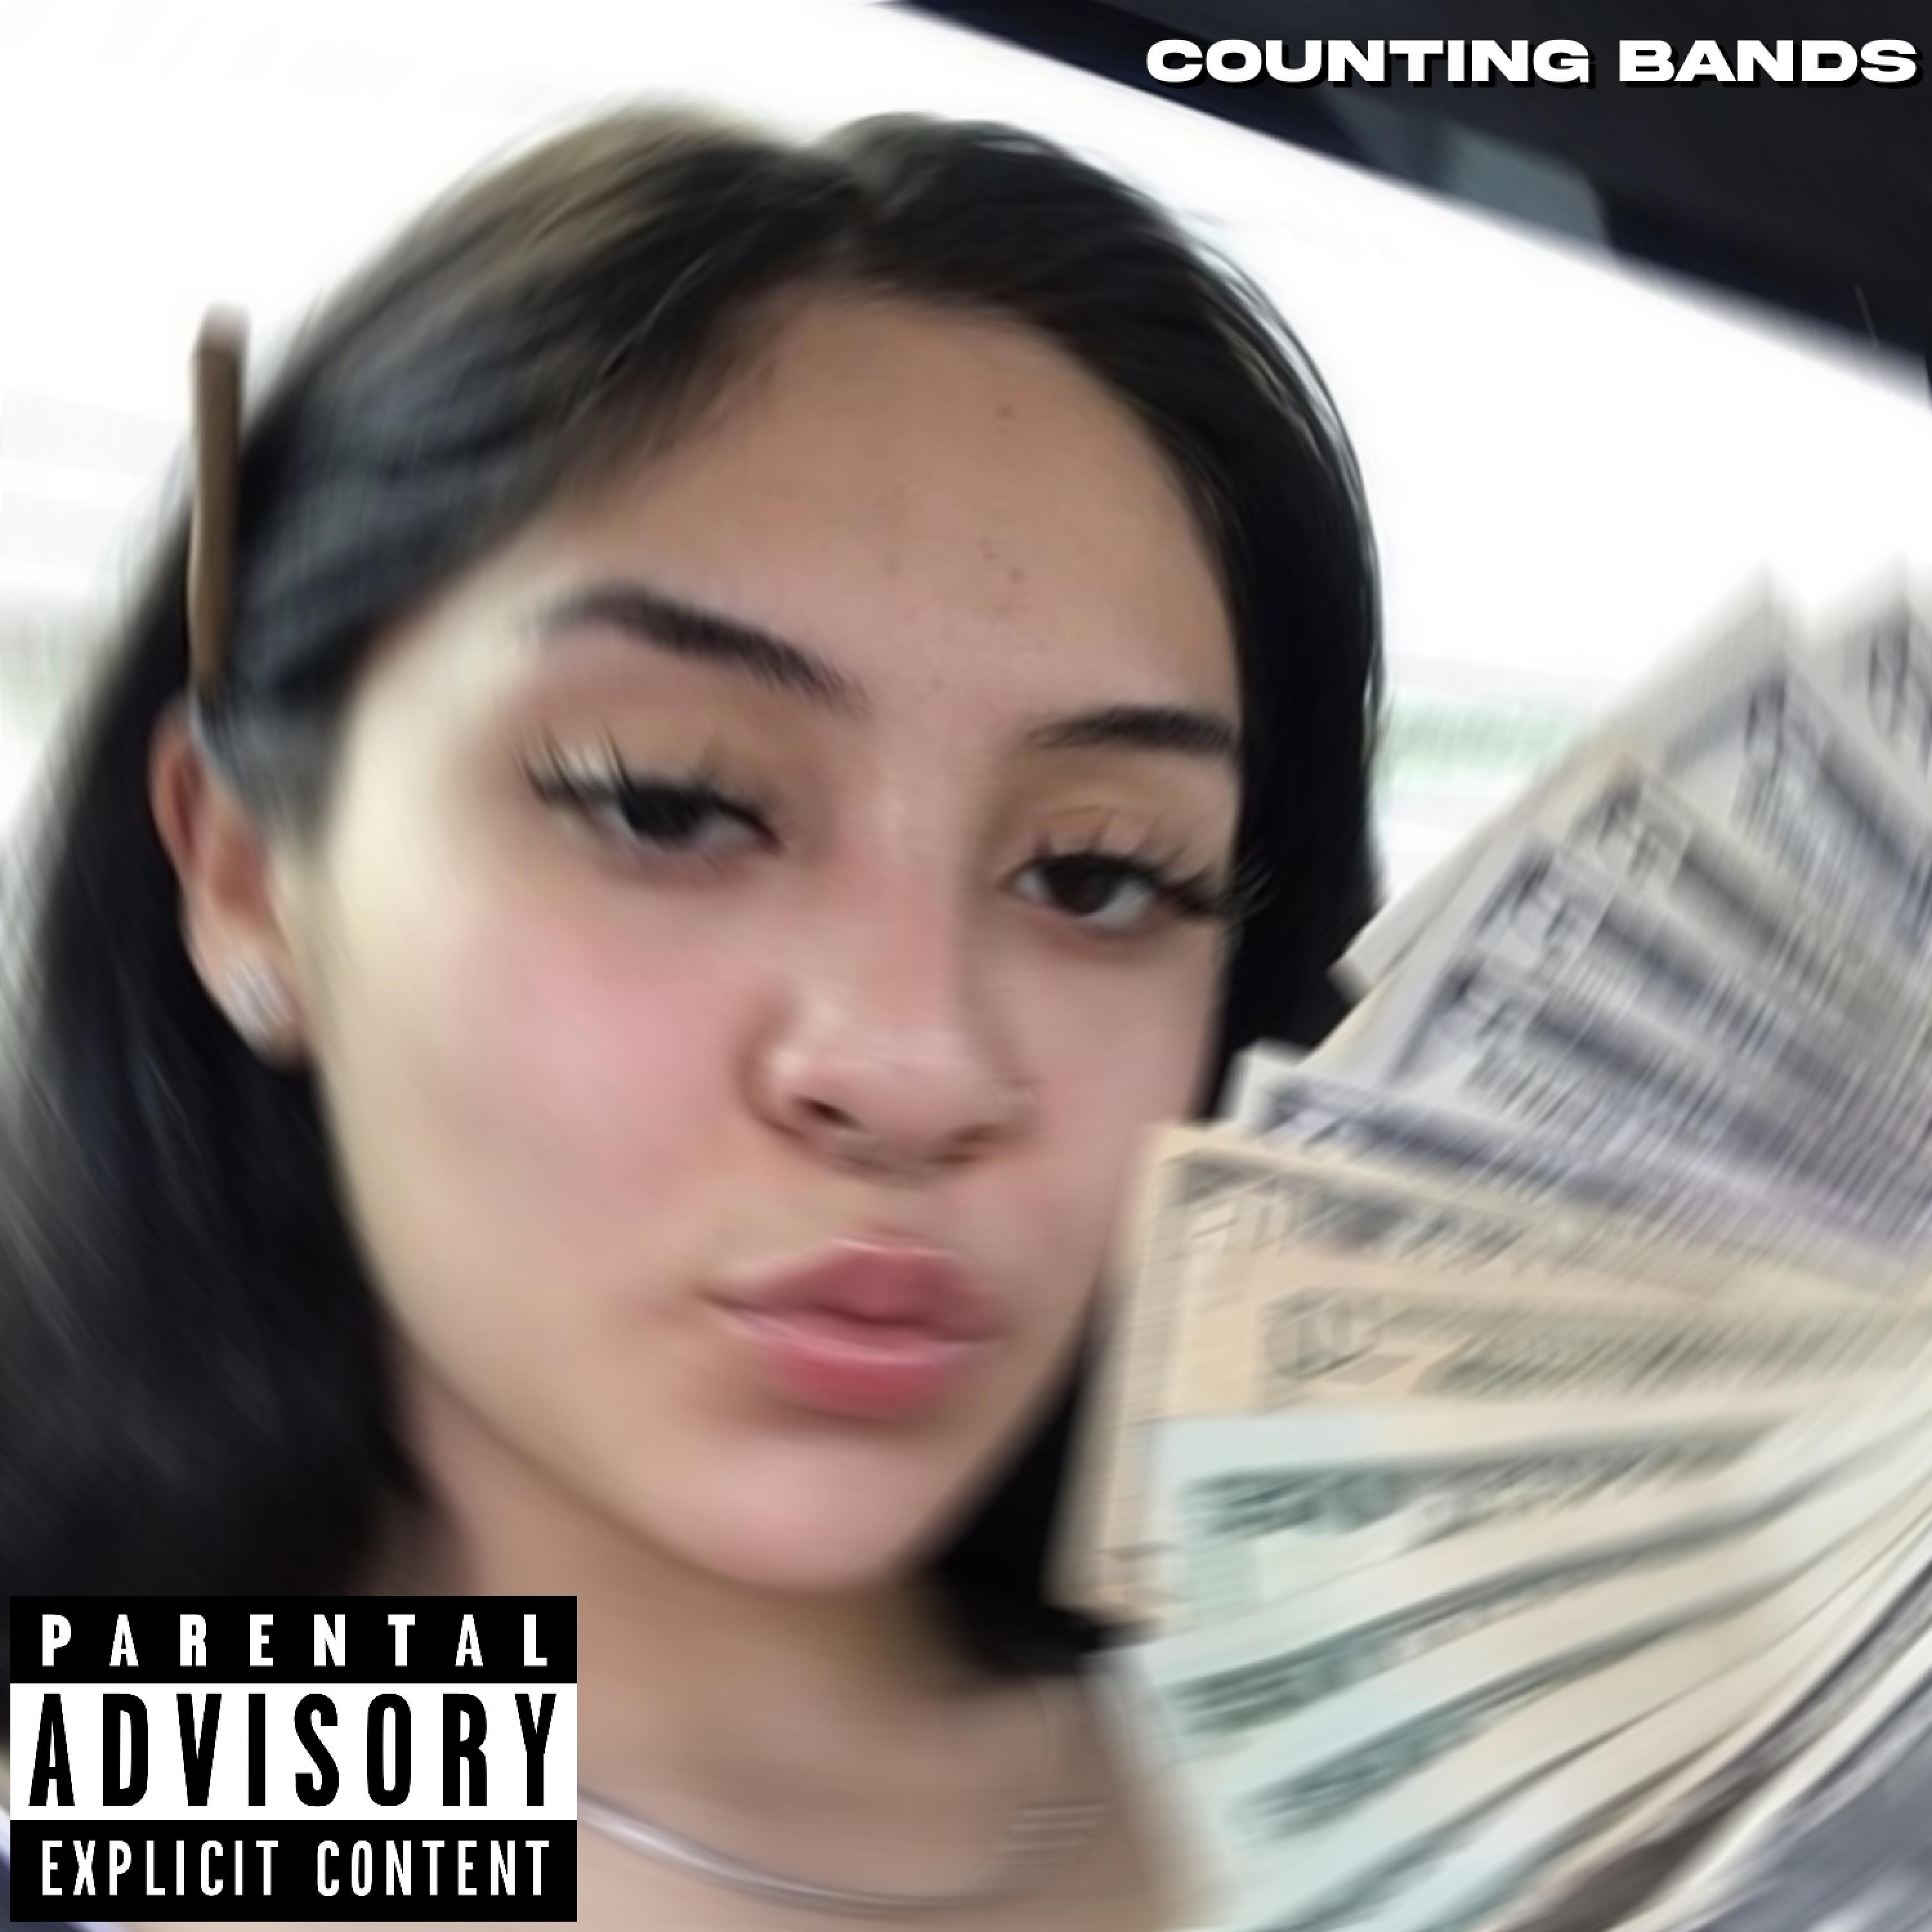 Racks - COUNTING BANDS